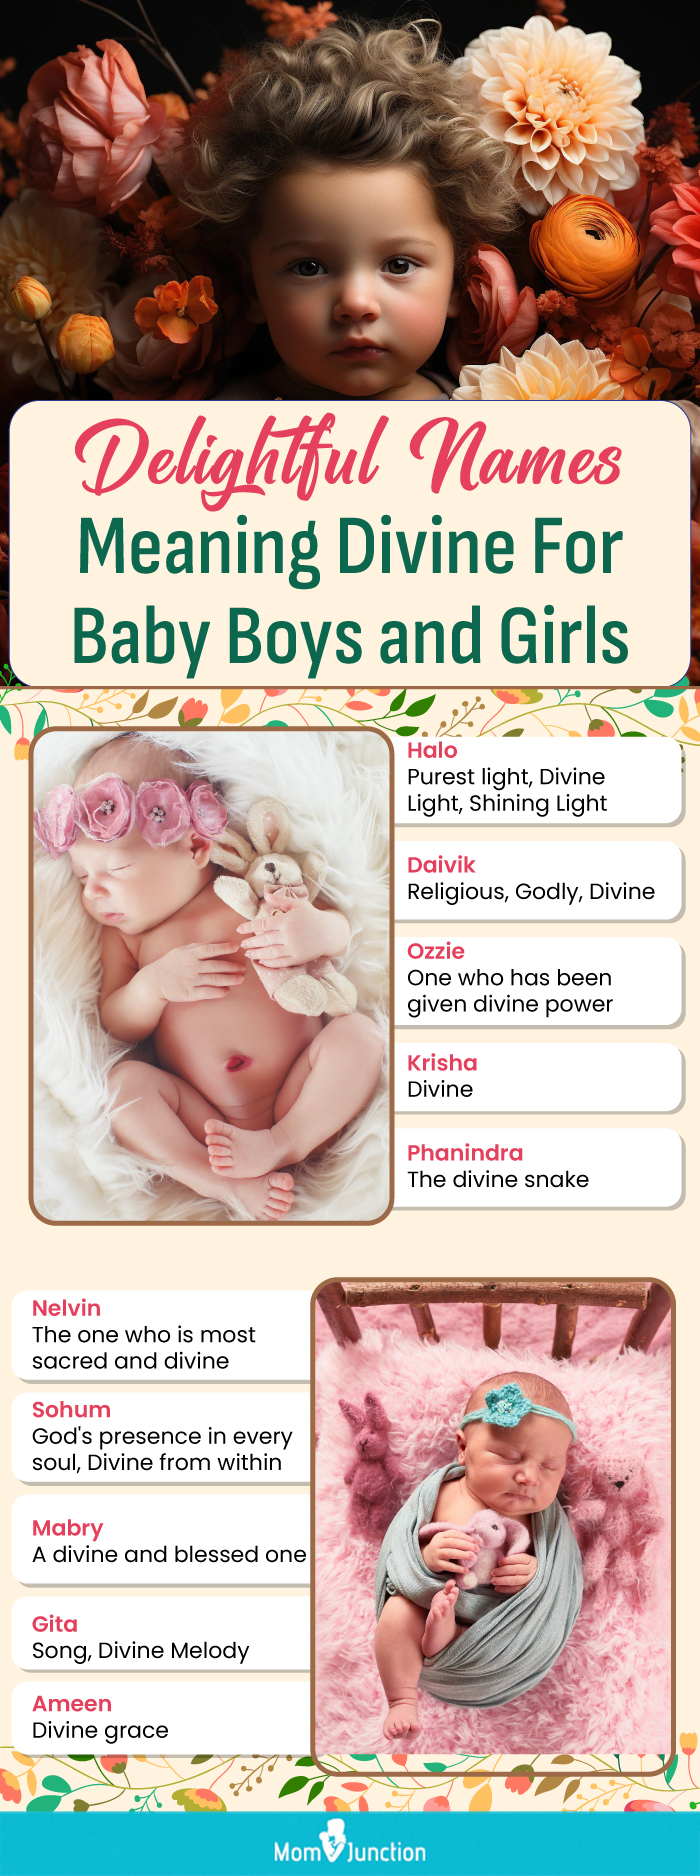 delightful names meaning divine for baby boys and girls (infographic)